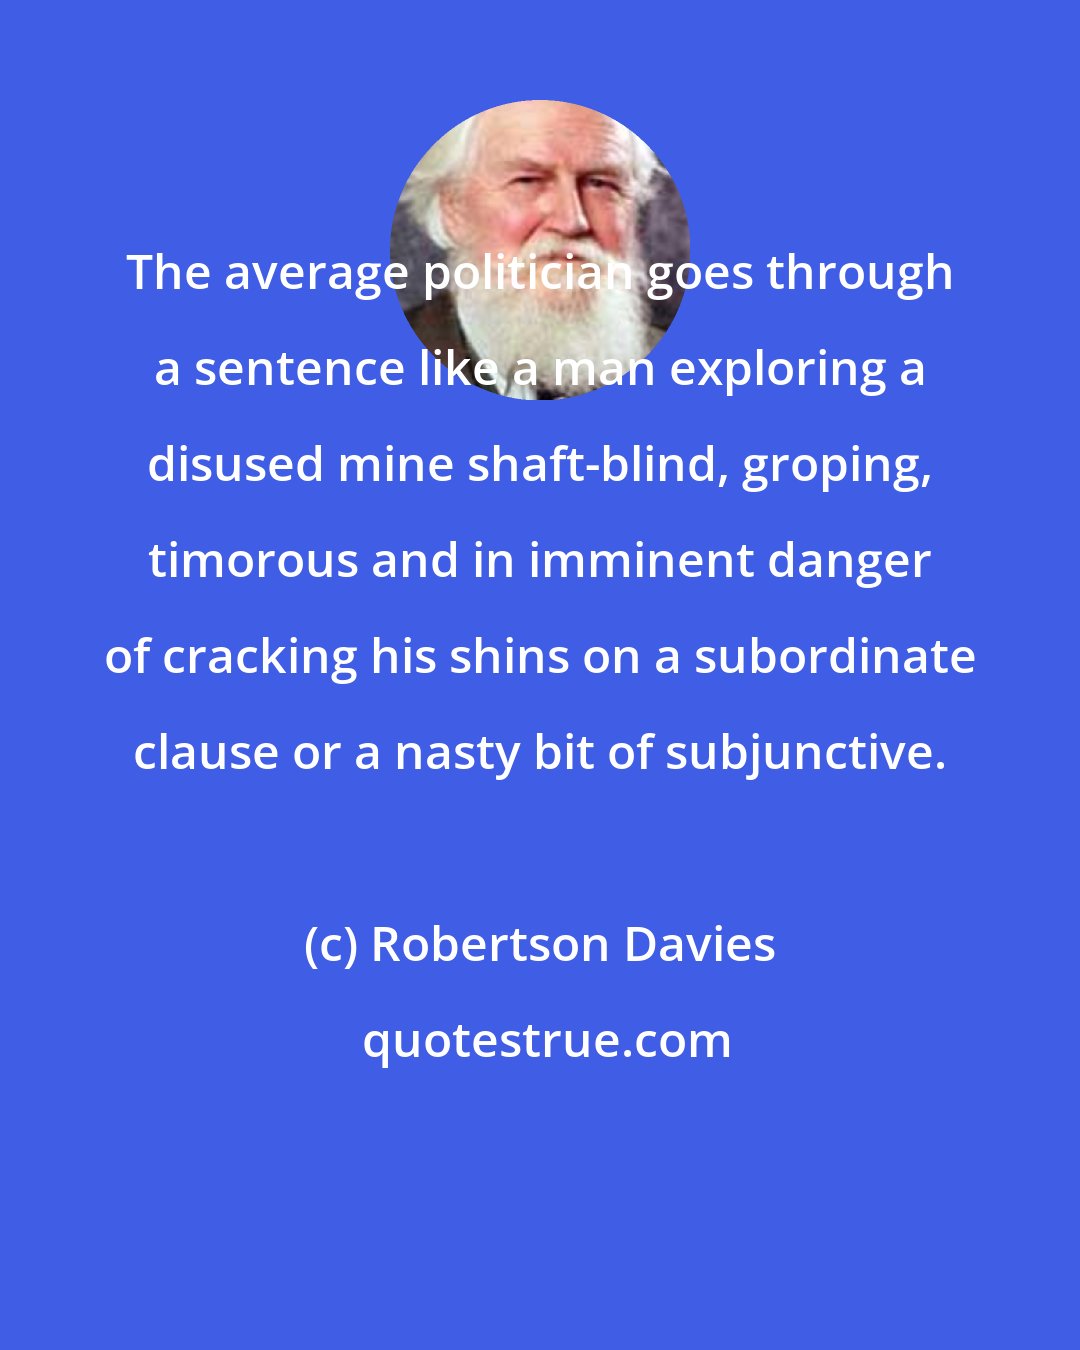 Robertson Davies: The average politician goes through a sentence like a man exploring a disused mine shaft-blind, groping, timorous and in imminent danger of cracking his shins on a subordinate clause or a nasty bit of subjunctive.